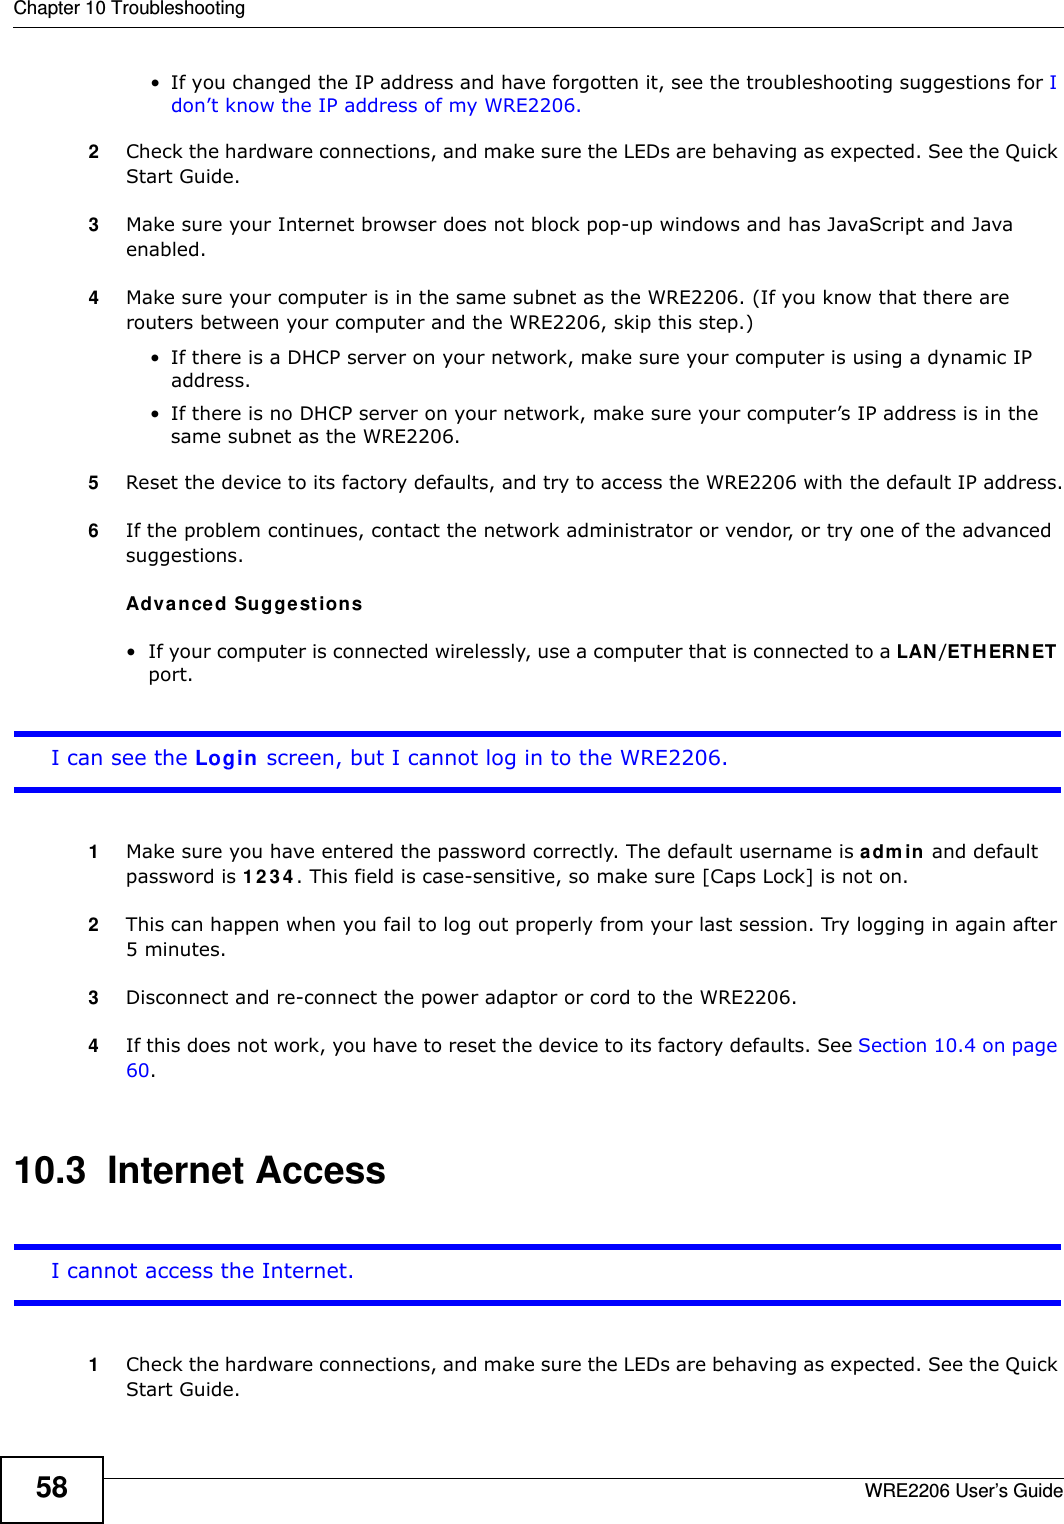 Chapter 10 TroubleshootingWRE2206 User’s Guide58• If you changed the IP address and have forgotten it, see the troubleshooting suggestions for I don’t know the IP address of my WRE2206.2Check the hardware connections, and make sure the LEDs are behaving as expected. See the Quick Start Guide. 3Make sure your Internet browser does not block pop-up windows and has JavaScript and Java enabled.4Make sure your computer is in the same subnet as the WRE2206. (If you know that there are routers between your computer and the WRE2206, skip this step.)• If there is a DHCP server on your network, make sure your computer is using a dynamic IP address. • If there is no DHCP server on your network, make sure your computer’s IP address is in the same subnet as the WRE2206.5Reset the device to its factory defaults, and try to access the WRE2206 with the default IP address.6If the problem continues, contact the network administrator or vendor, or try one of the advanced suggestions.Adva n ced Sugge st ions• If your computer is connected wirelessly, use a computer that is connected to a LAN /ETH ERNET port.I can see the Login screen, but I cannot log in to the WRE2206.1Make sure you have entered the password correctly. The default username is adm in and default password is 1 2 3 4 . This field is case-sensitive, so make sure [Caps Lock] is not on. 2This can happen when you fail to log out properly from your last session. Try logging in again after 5 minutes.3Disconnect and re-connect the power adaptor or cord to the WRE2206. 4If this does not work, you have to reset the device to its factory defaults. See Section 10.4 on page 60.10.3  Internet AccessI cannot access the Internet.1Check the hardware connections, and make sure the LEDs are behaving as expected. See the Quick Start Guide.